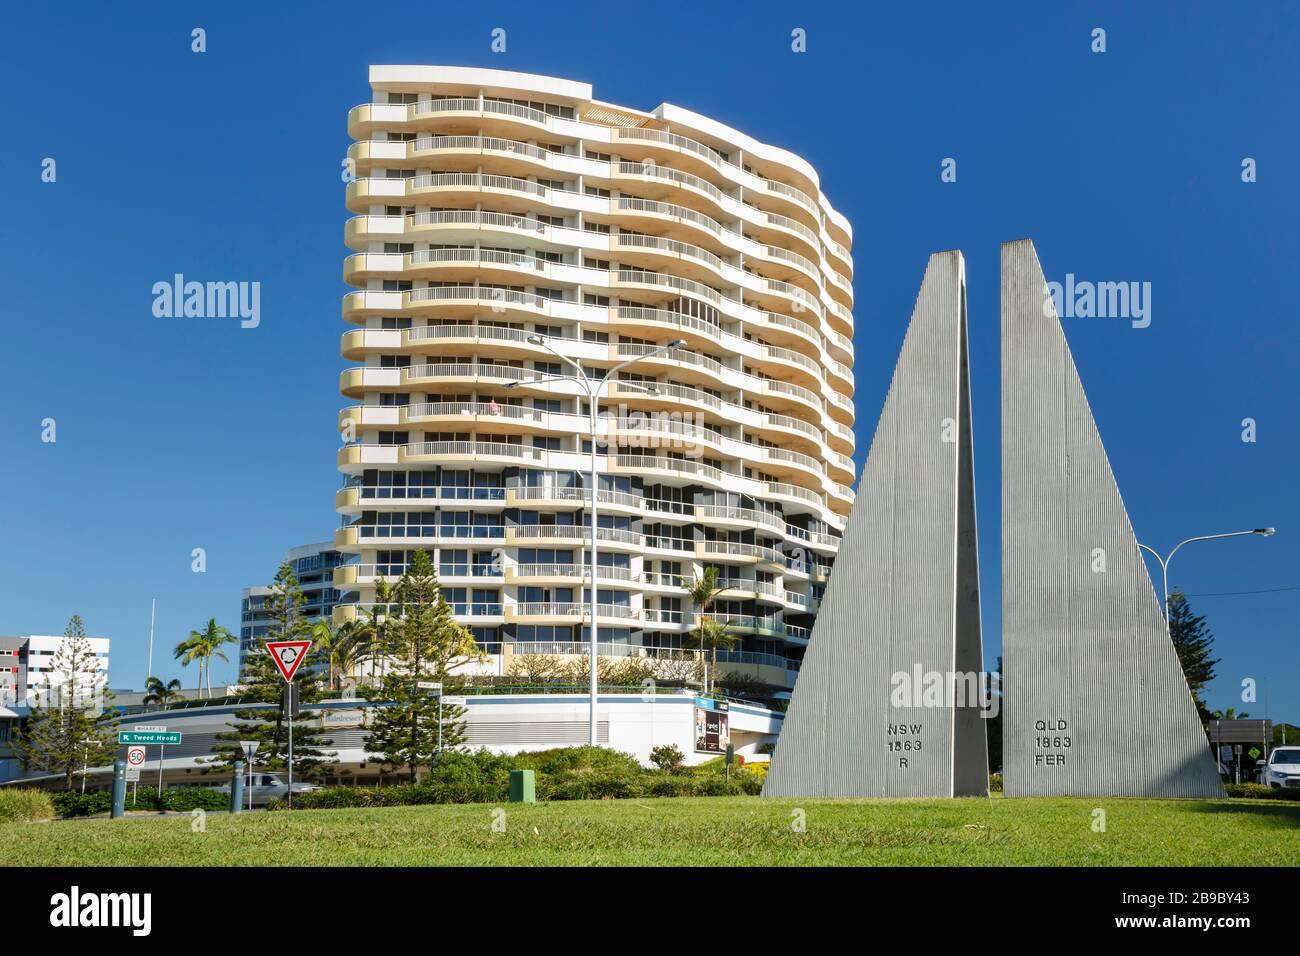 Coolangatta, Australia: June 25, 2016: Queensland and New South Wales state border, geographical marker monument in Tweed Heads, Gold Coast, Queensland, coronavirus border protection, Australia Stock Photo